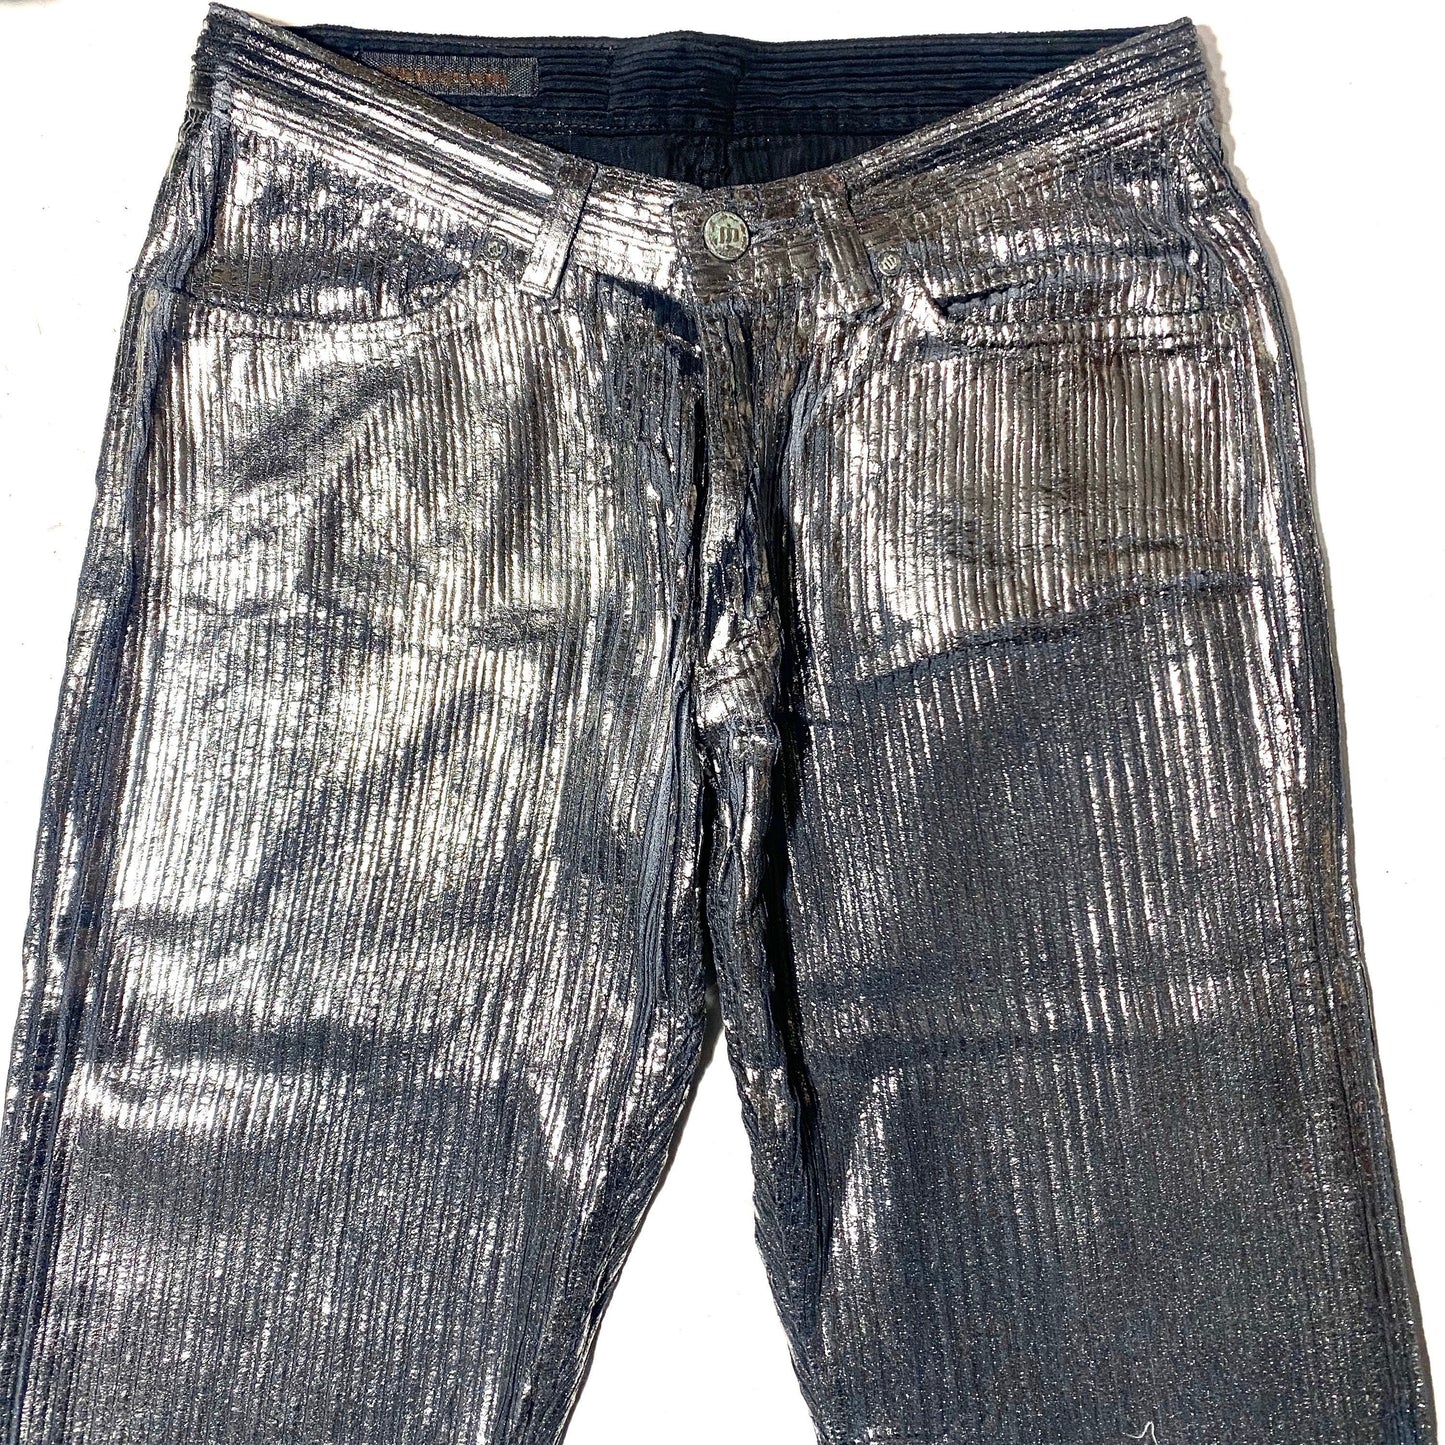 Mahrajah silver painted black corduroy velvet trousers available in sz 31, 33, new old stock 90s mint condition